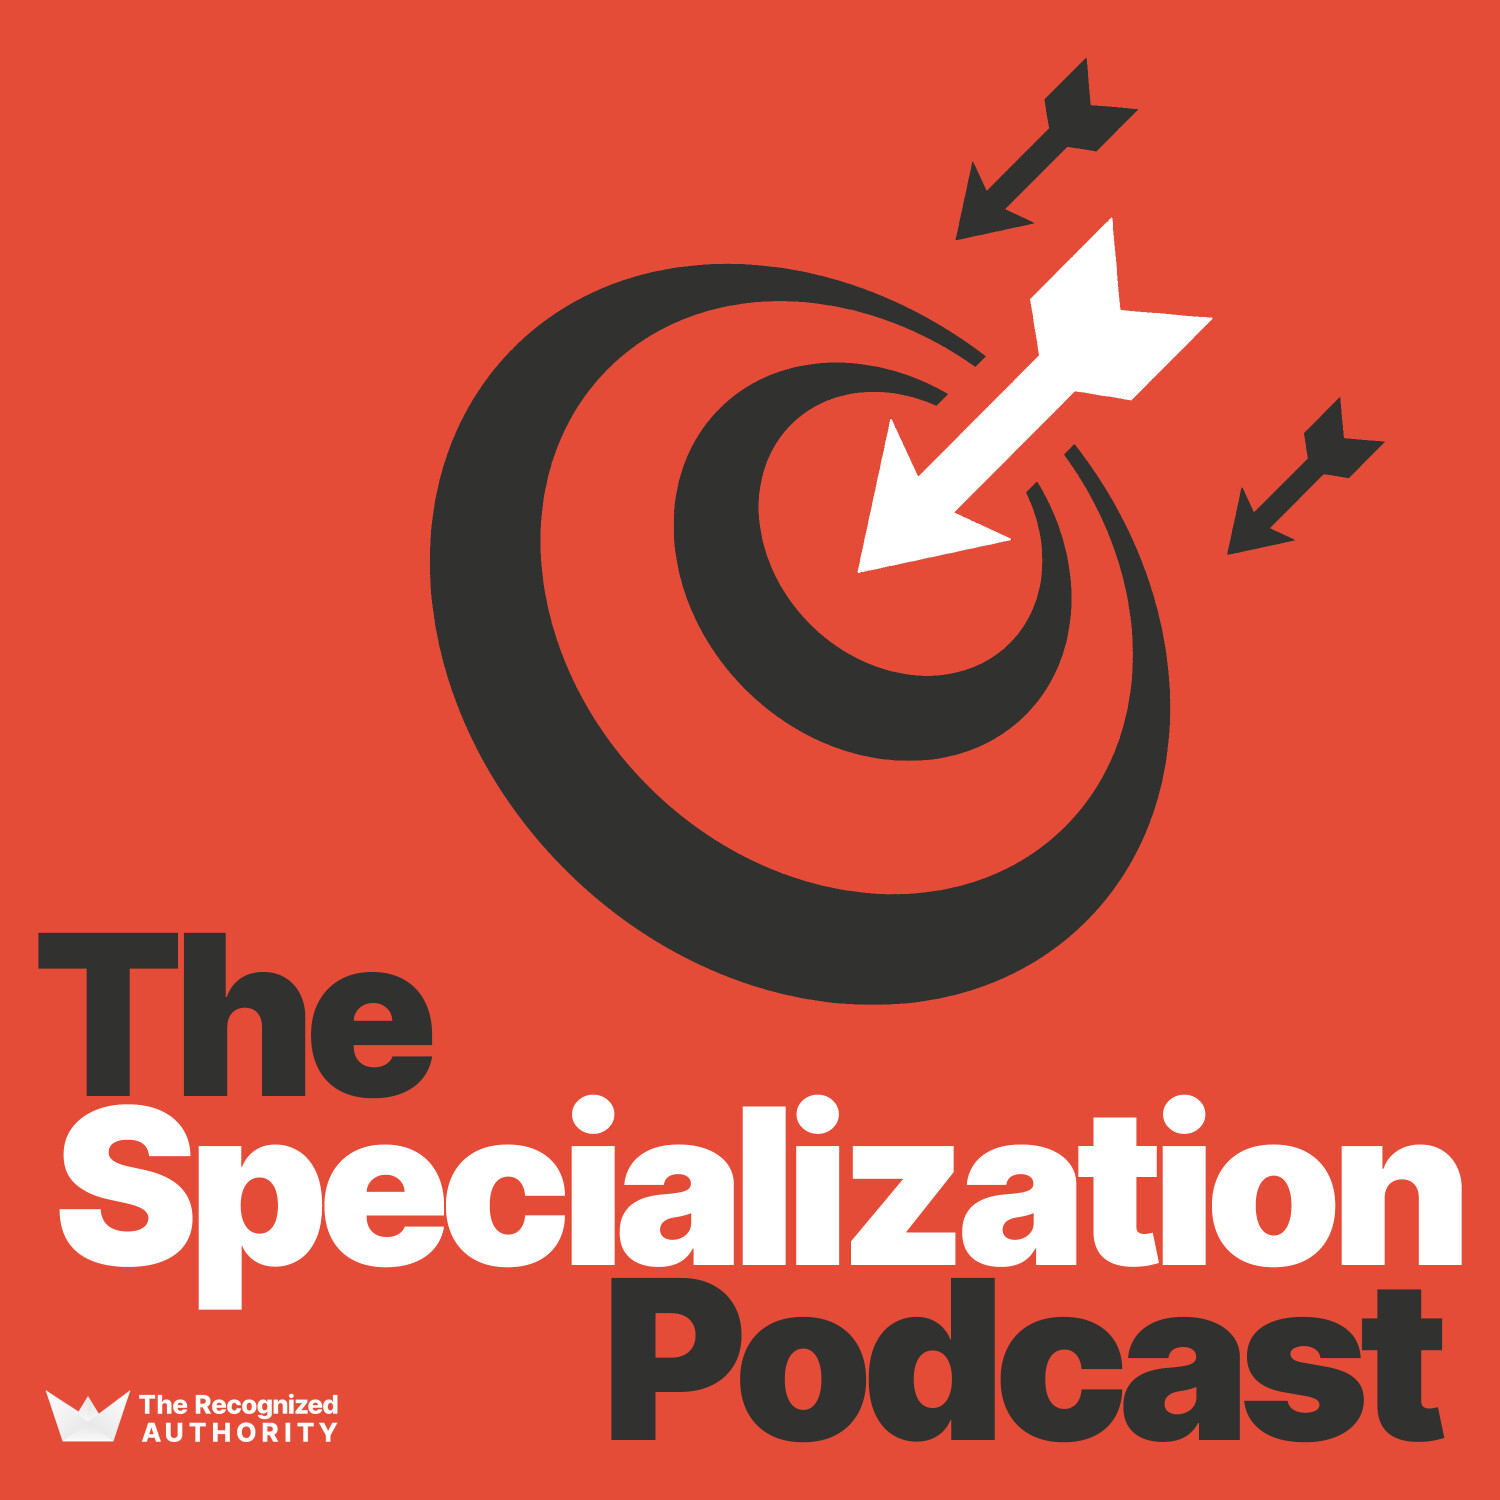 The Specialization Podcast